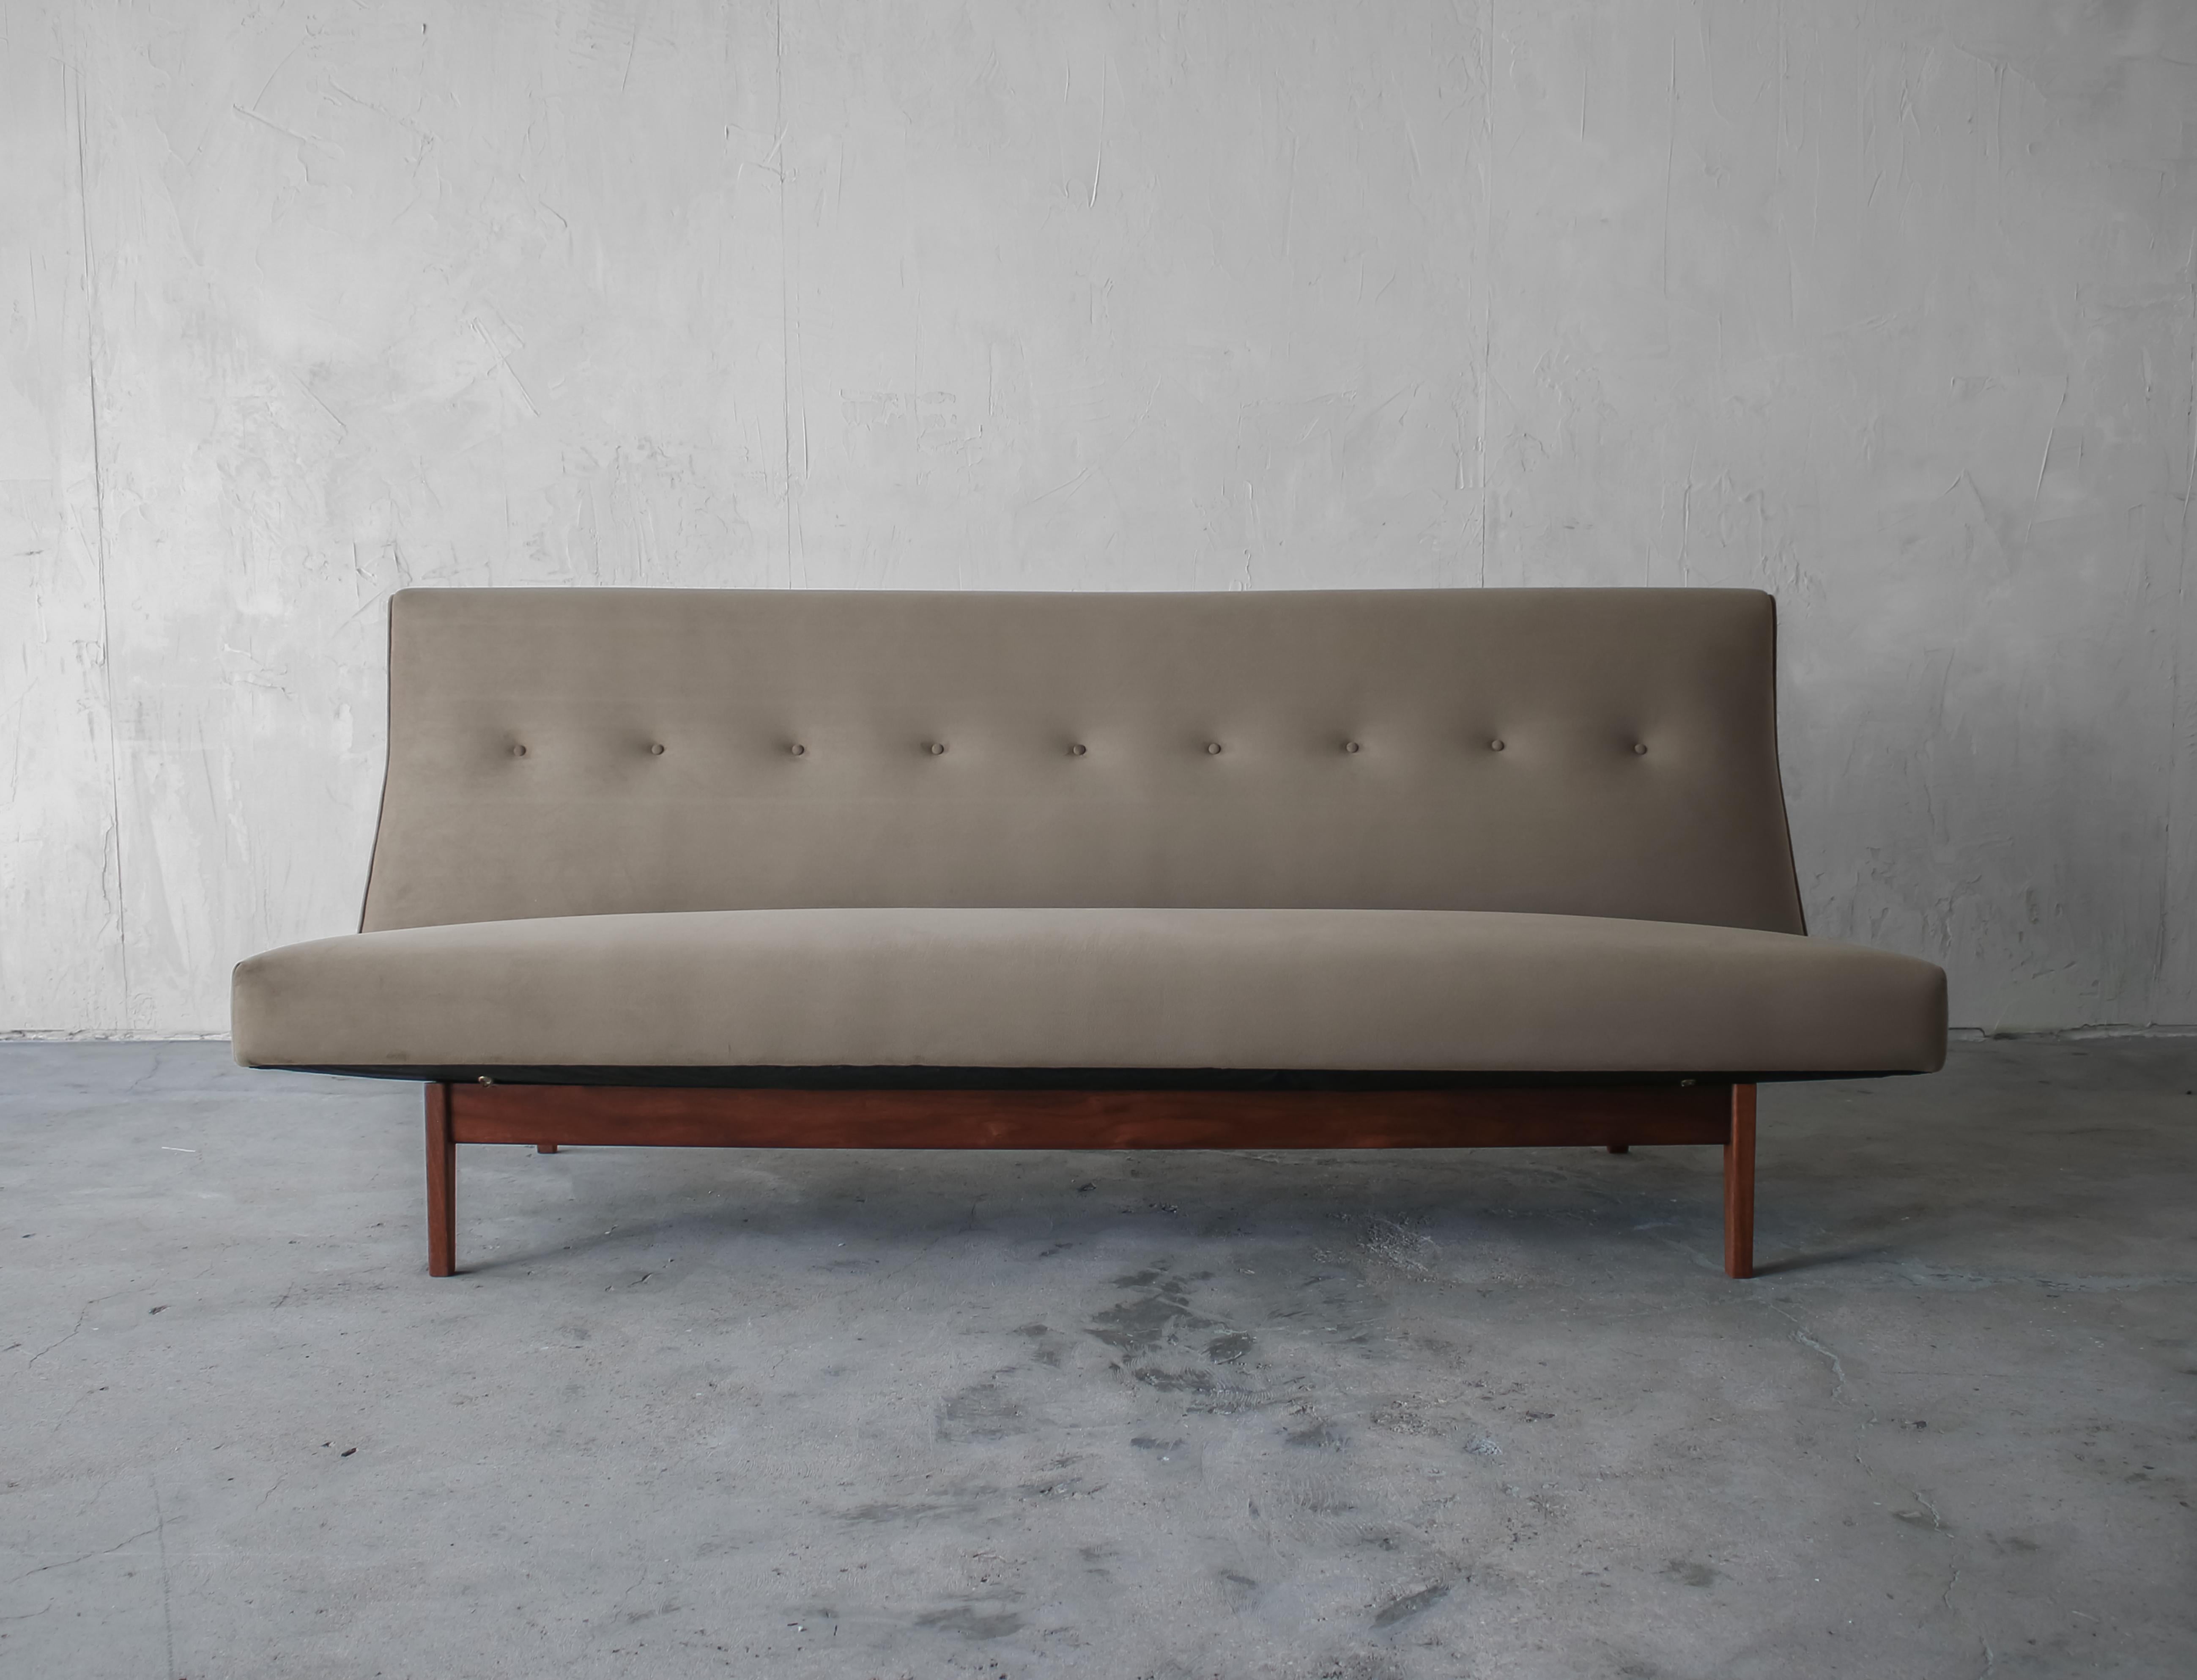 Mid-Century Modern Model 250 Armless Sofa by Jens Risom - 2 Available For Sale